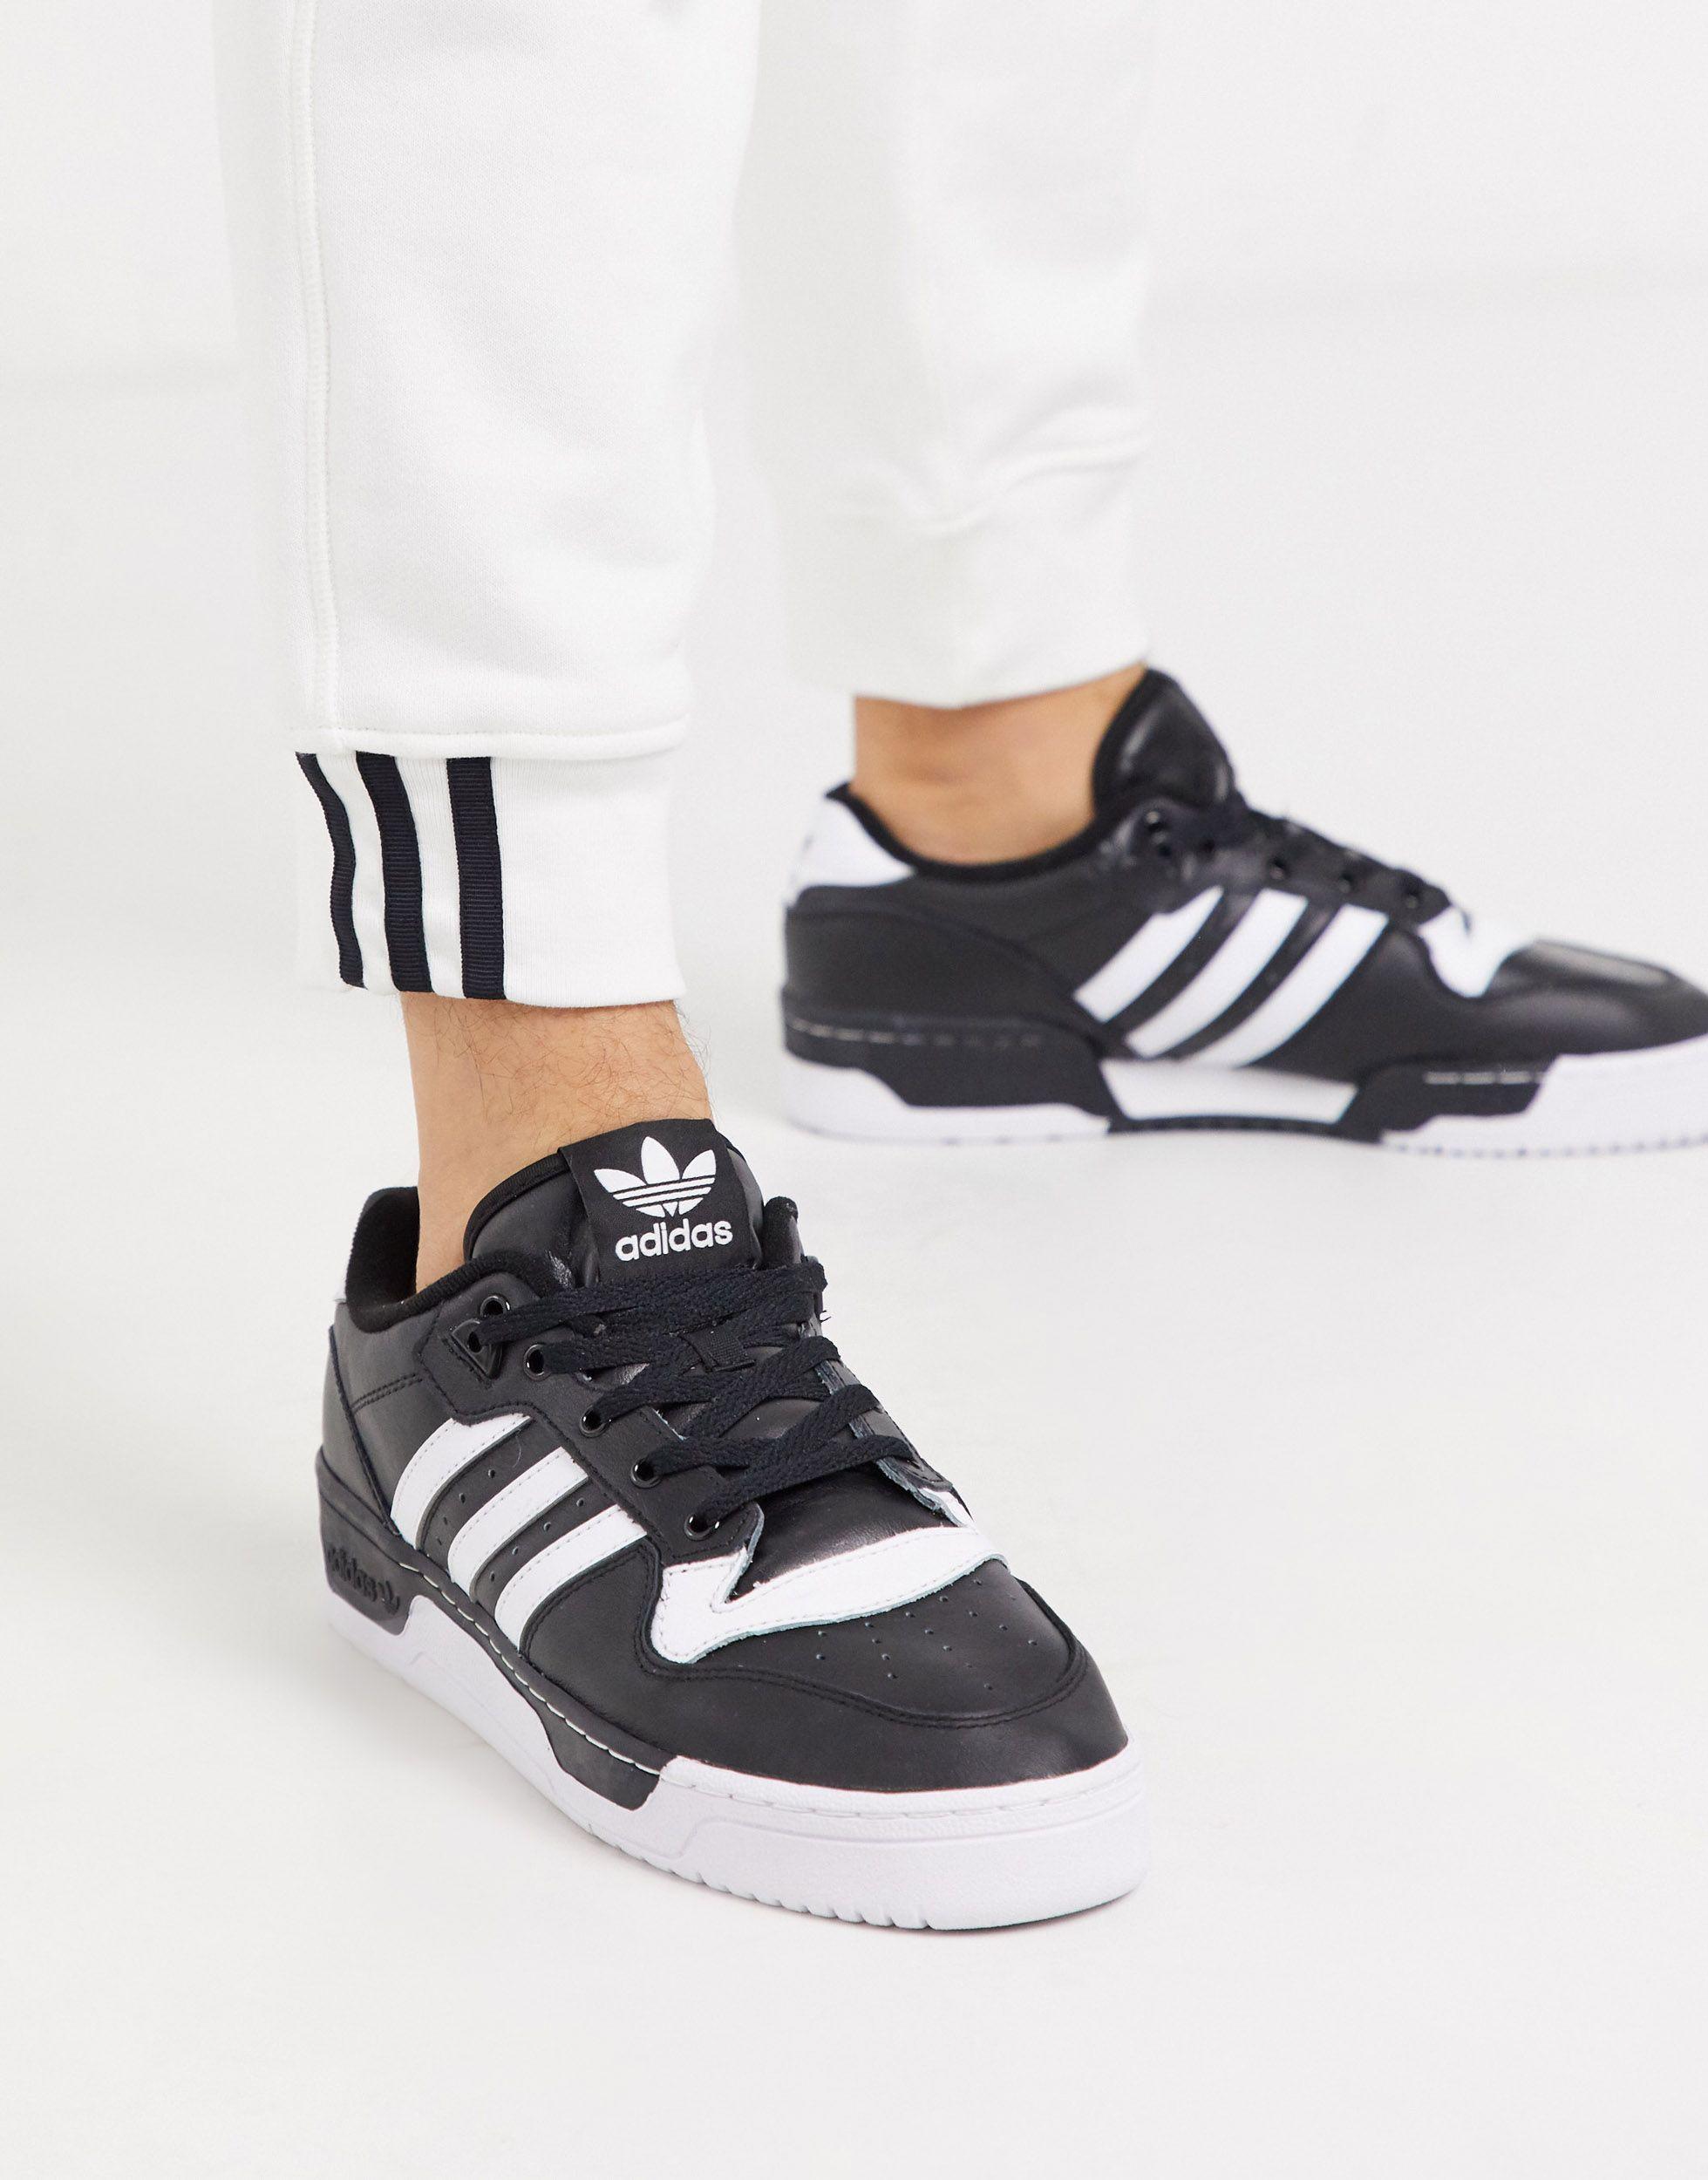 adidas Originals Leather Rivalry Low in Black/White (Black) for Men - Save  45% | Lyst